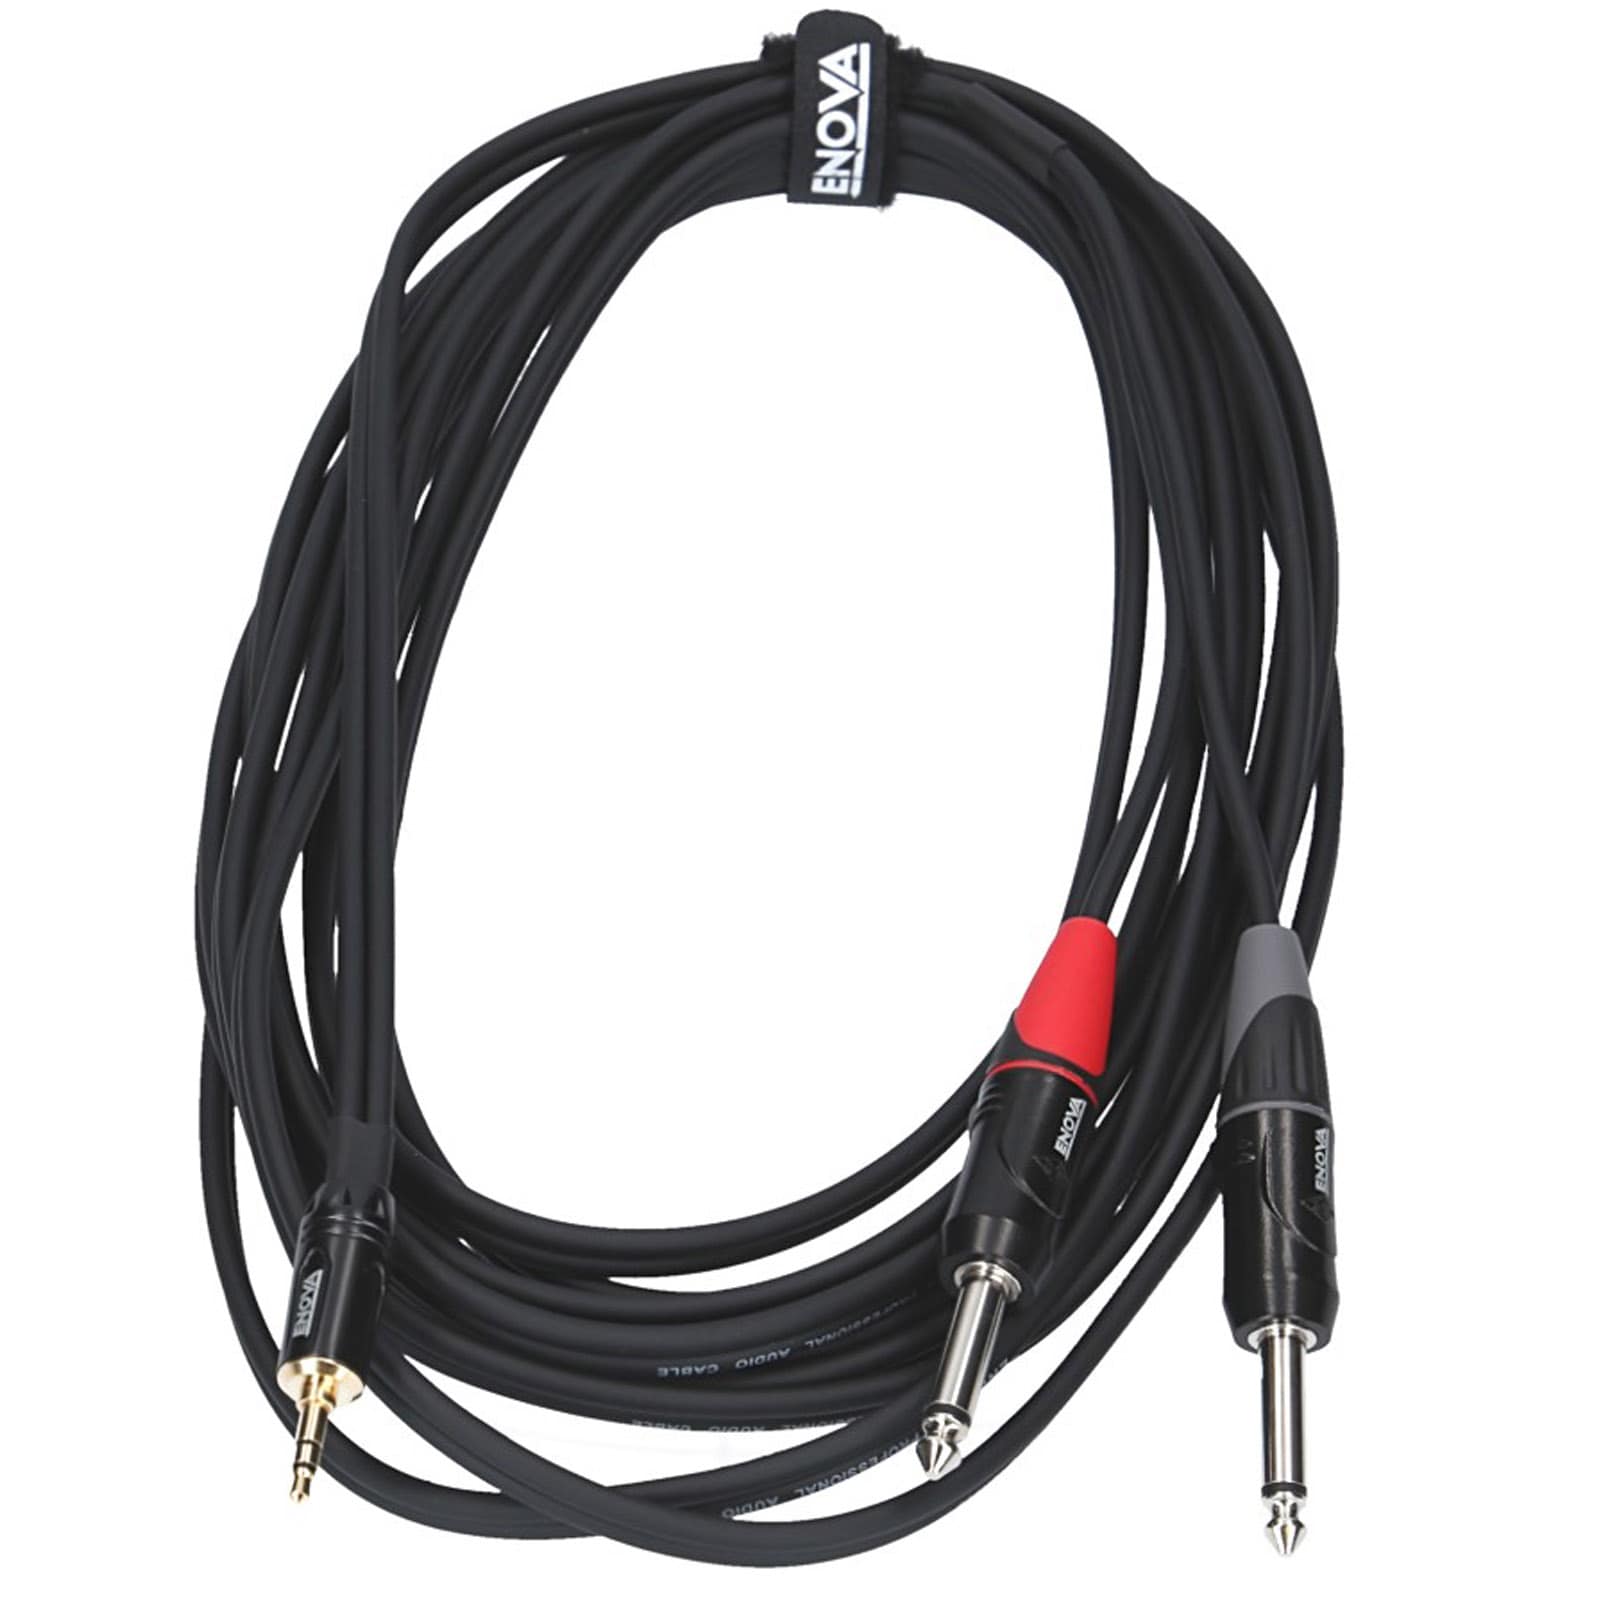 ENOVA, audio adapter cable, 5 meters 3.5mm jack stereo to 2x 6.3mm